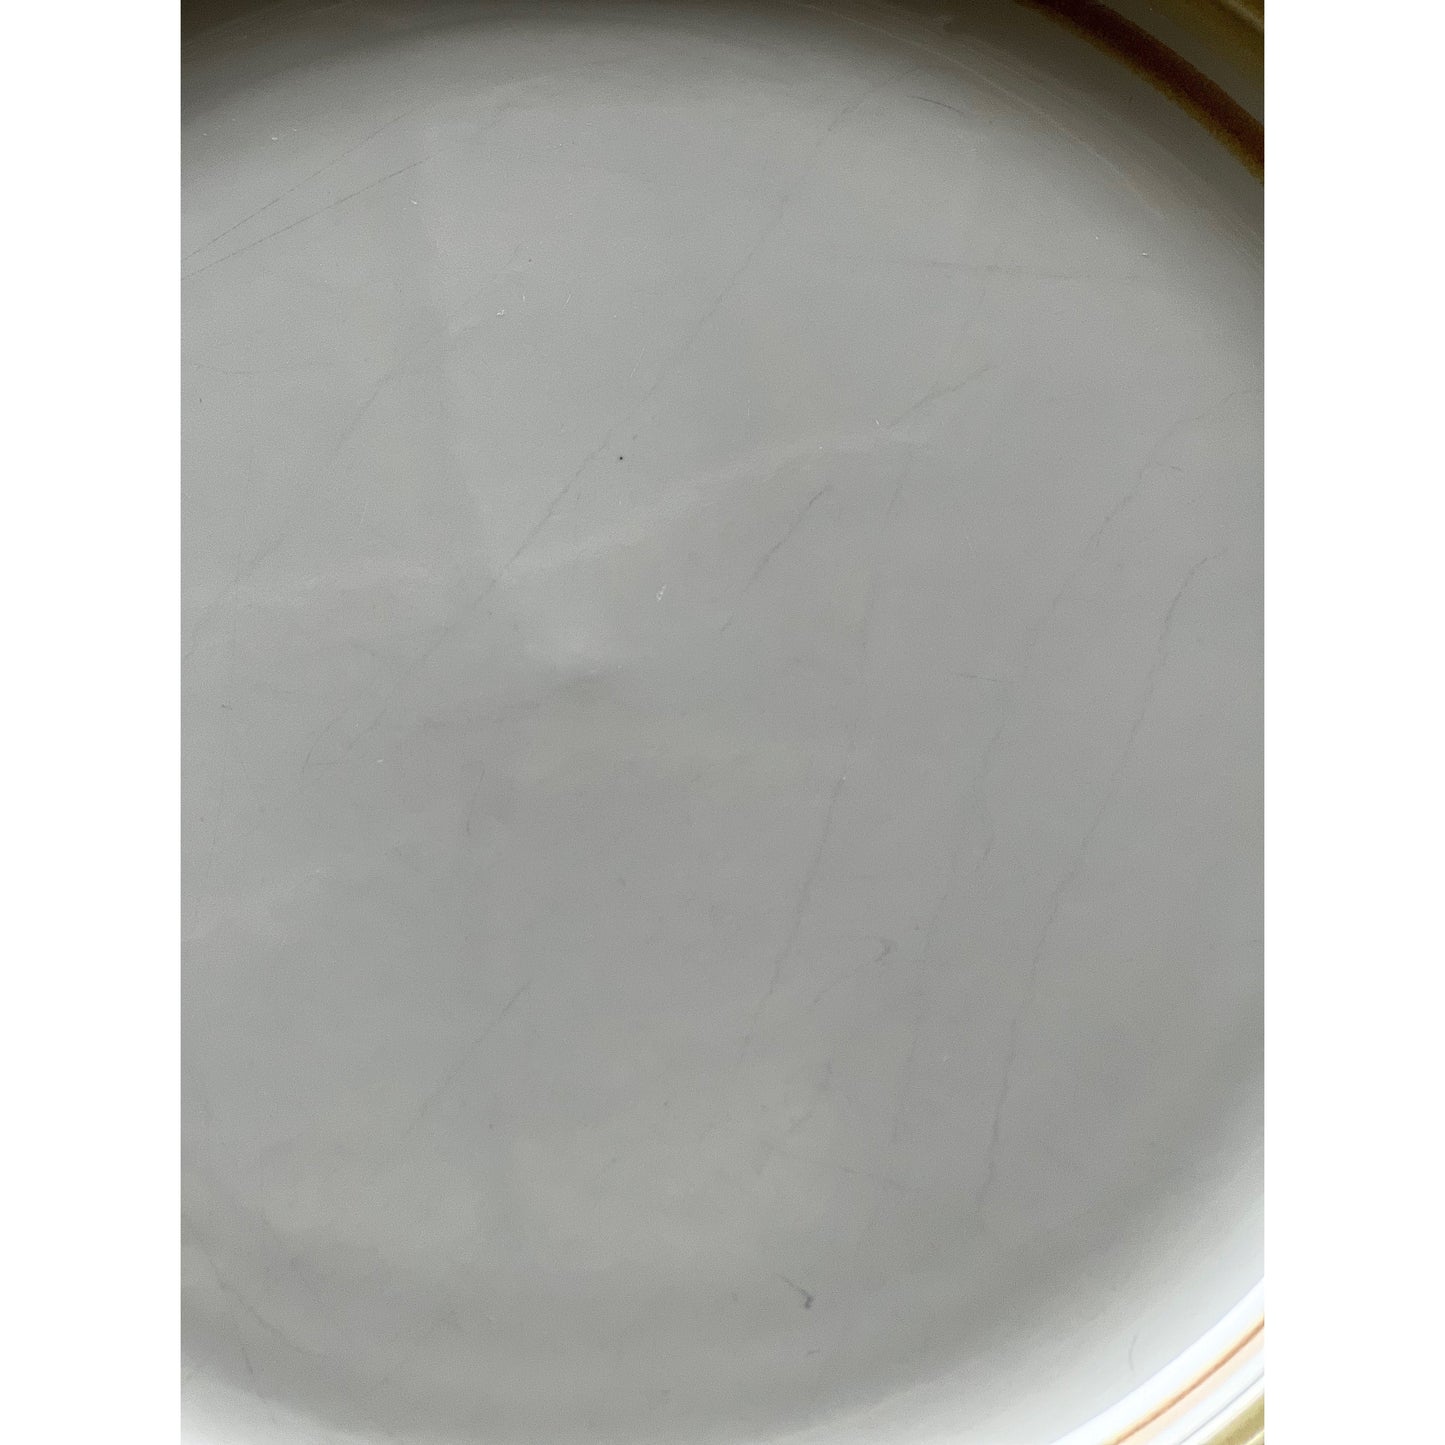 Impressions by Daniele Pebbled Shore Set of 4 Stoneware Dinner Plates